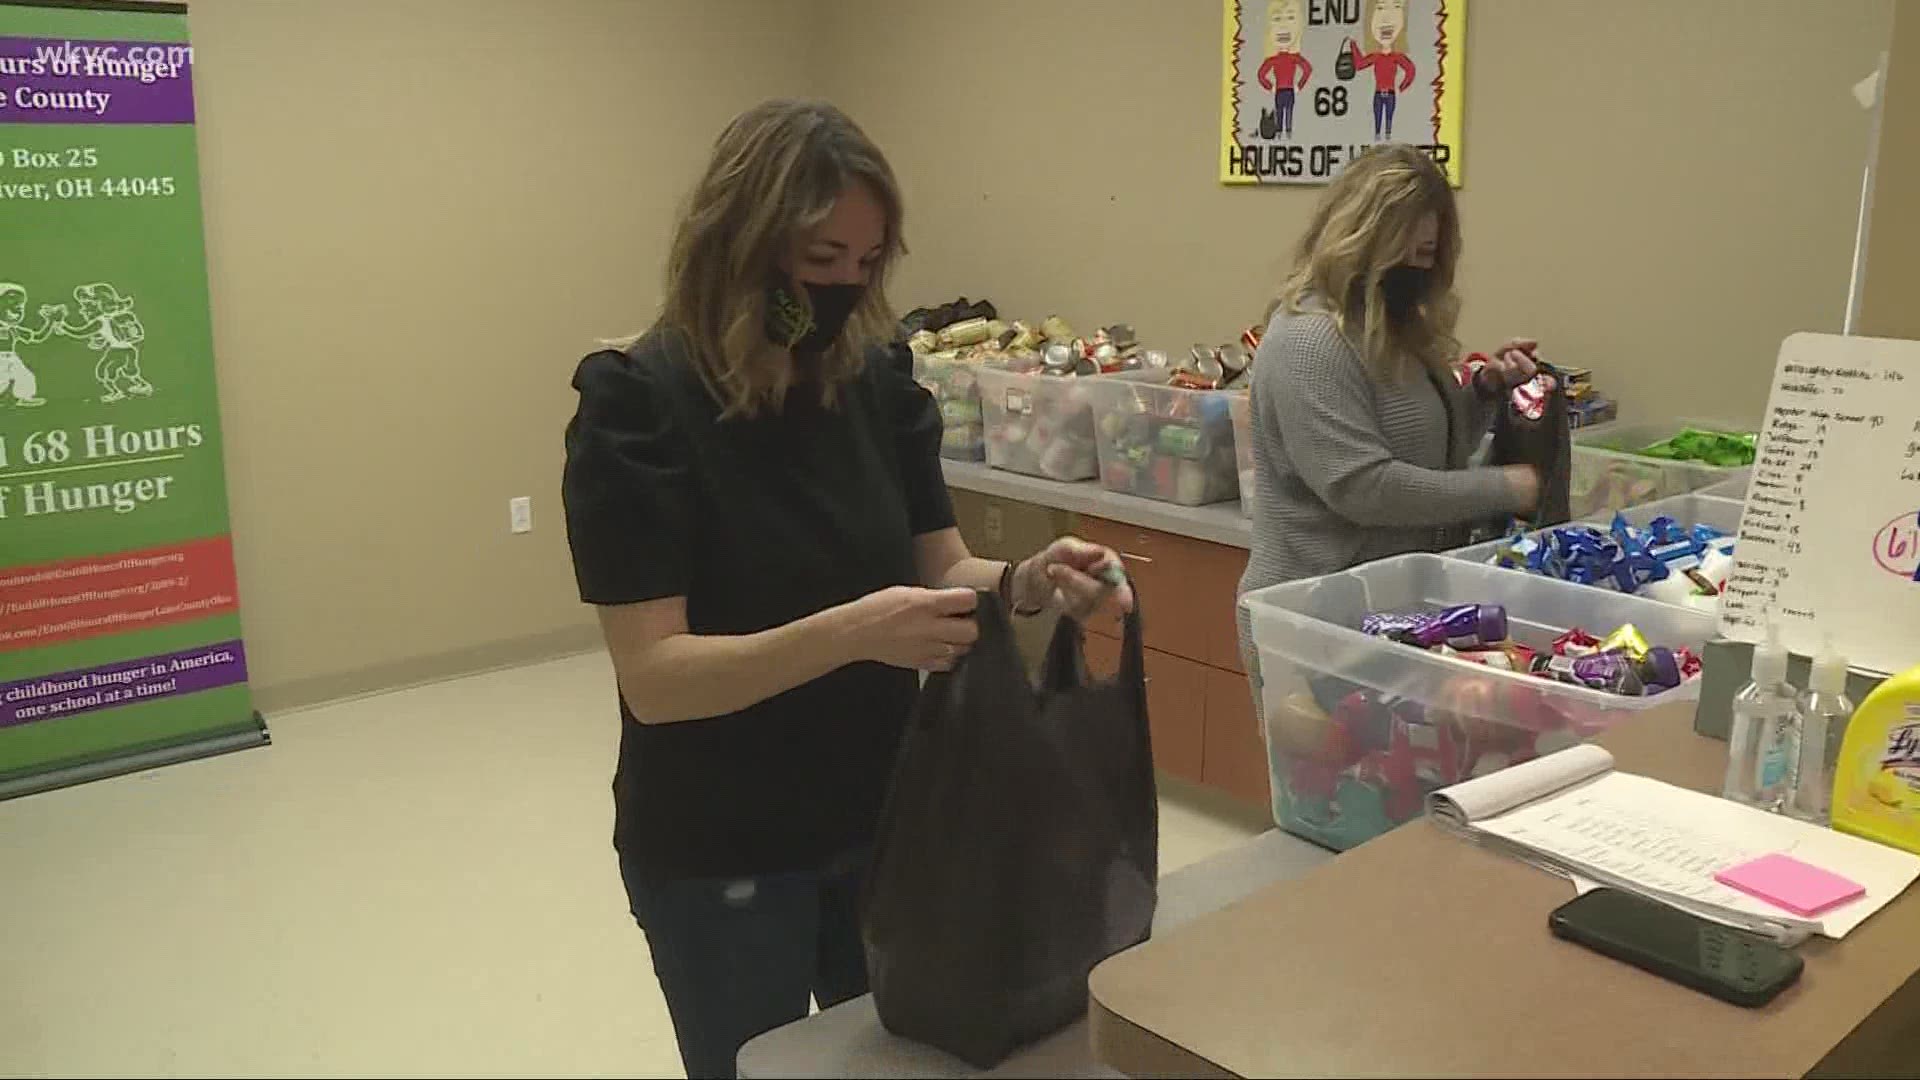 Meredith Everett and Tracy Stanek say their mission is to help children through the End 68 Hours of Hunger initiative. Laura Caso spoke with them.